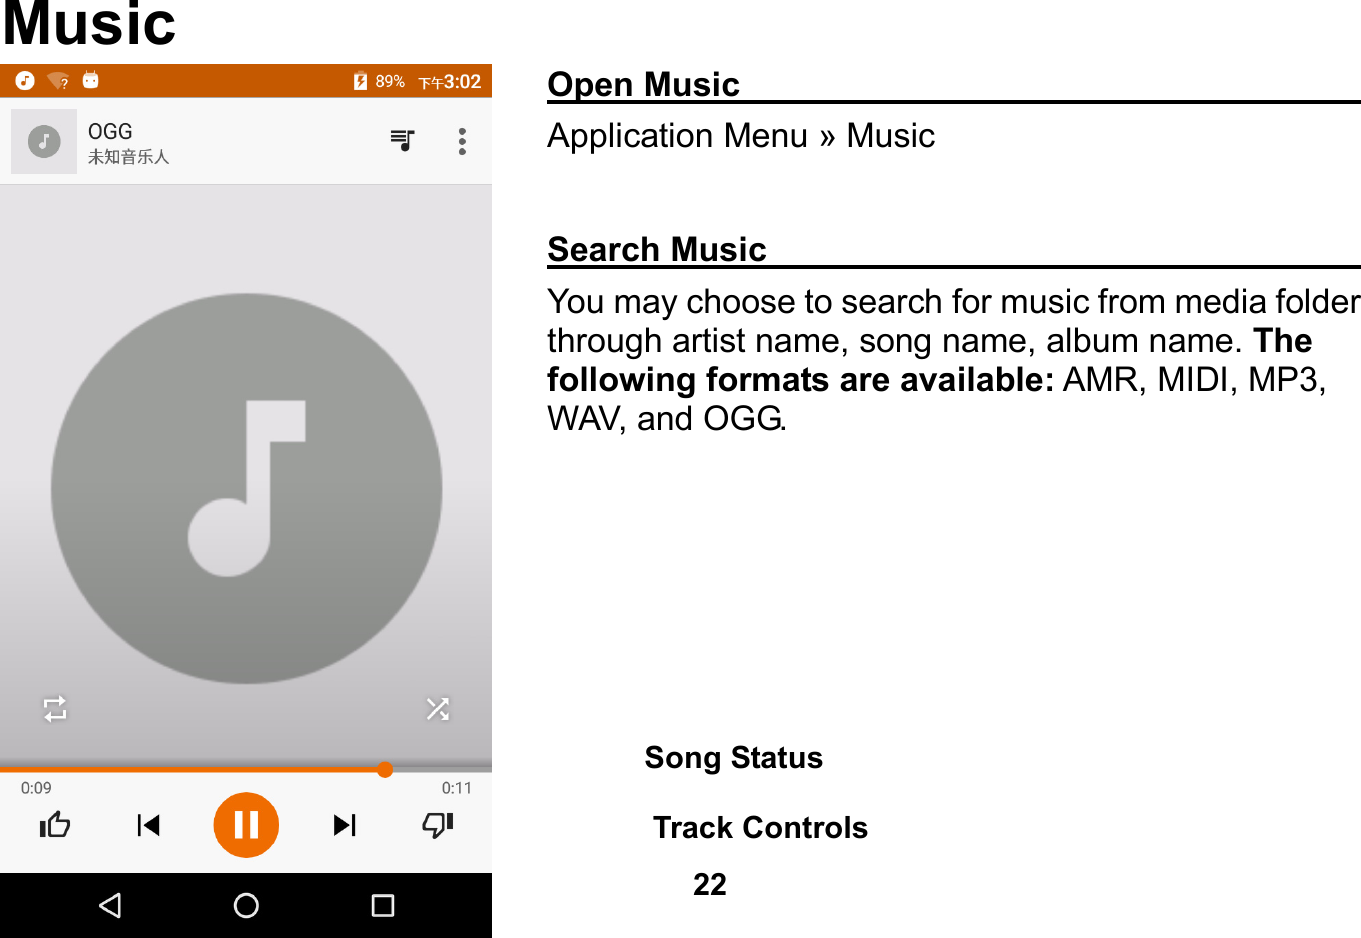   22   Music Open Music                                                  Application Menu » Music  Search Music                                                You may choose to search for music from media folder through artist name, song name, album name. The following formats are available: AMR, MIDI, MP3, WAV, and OGG.   Song Status    Track Controls